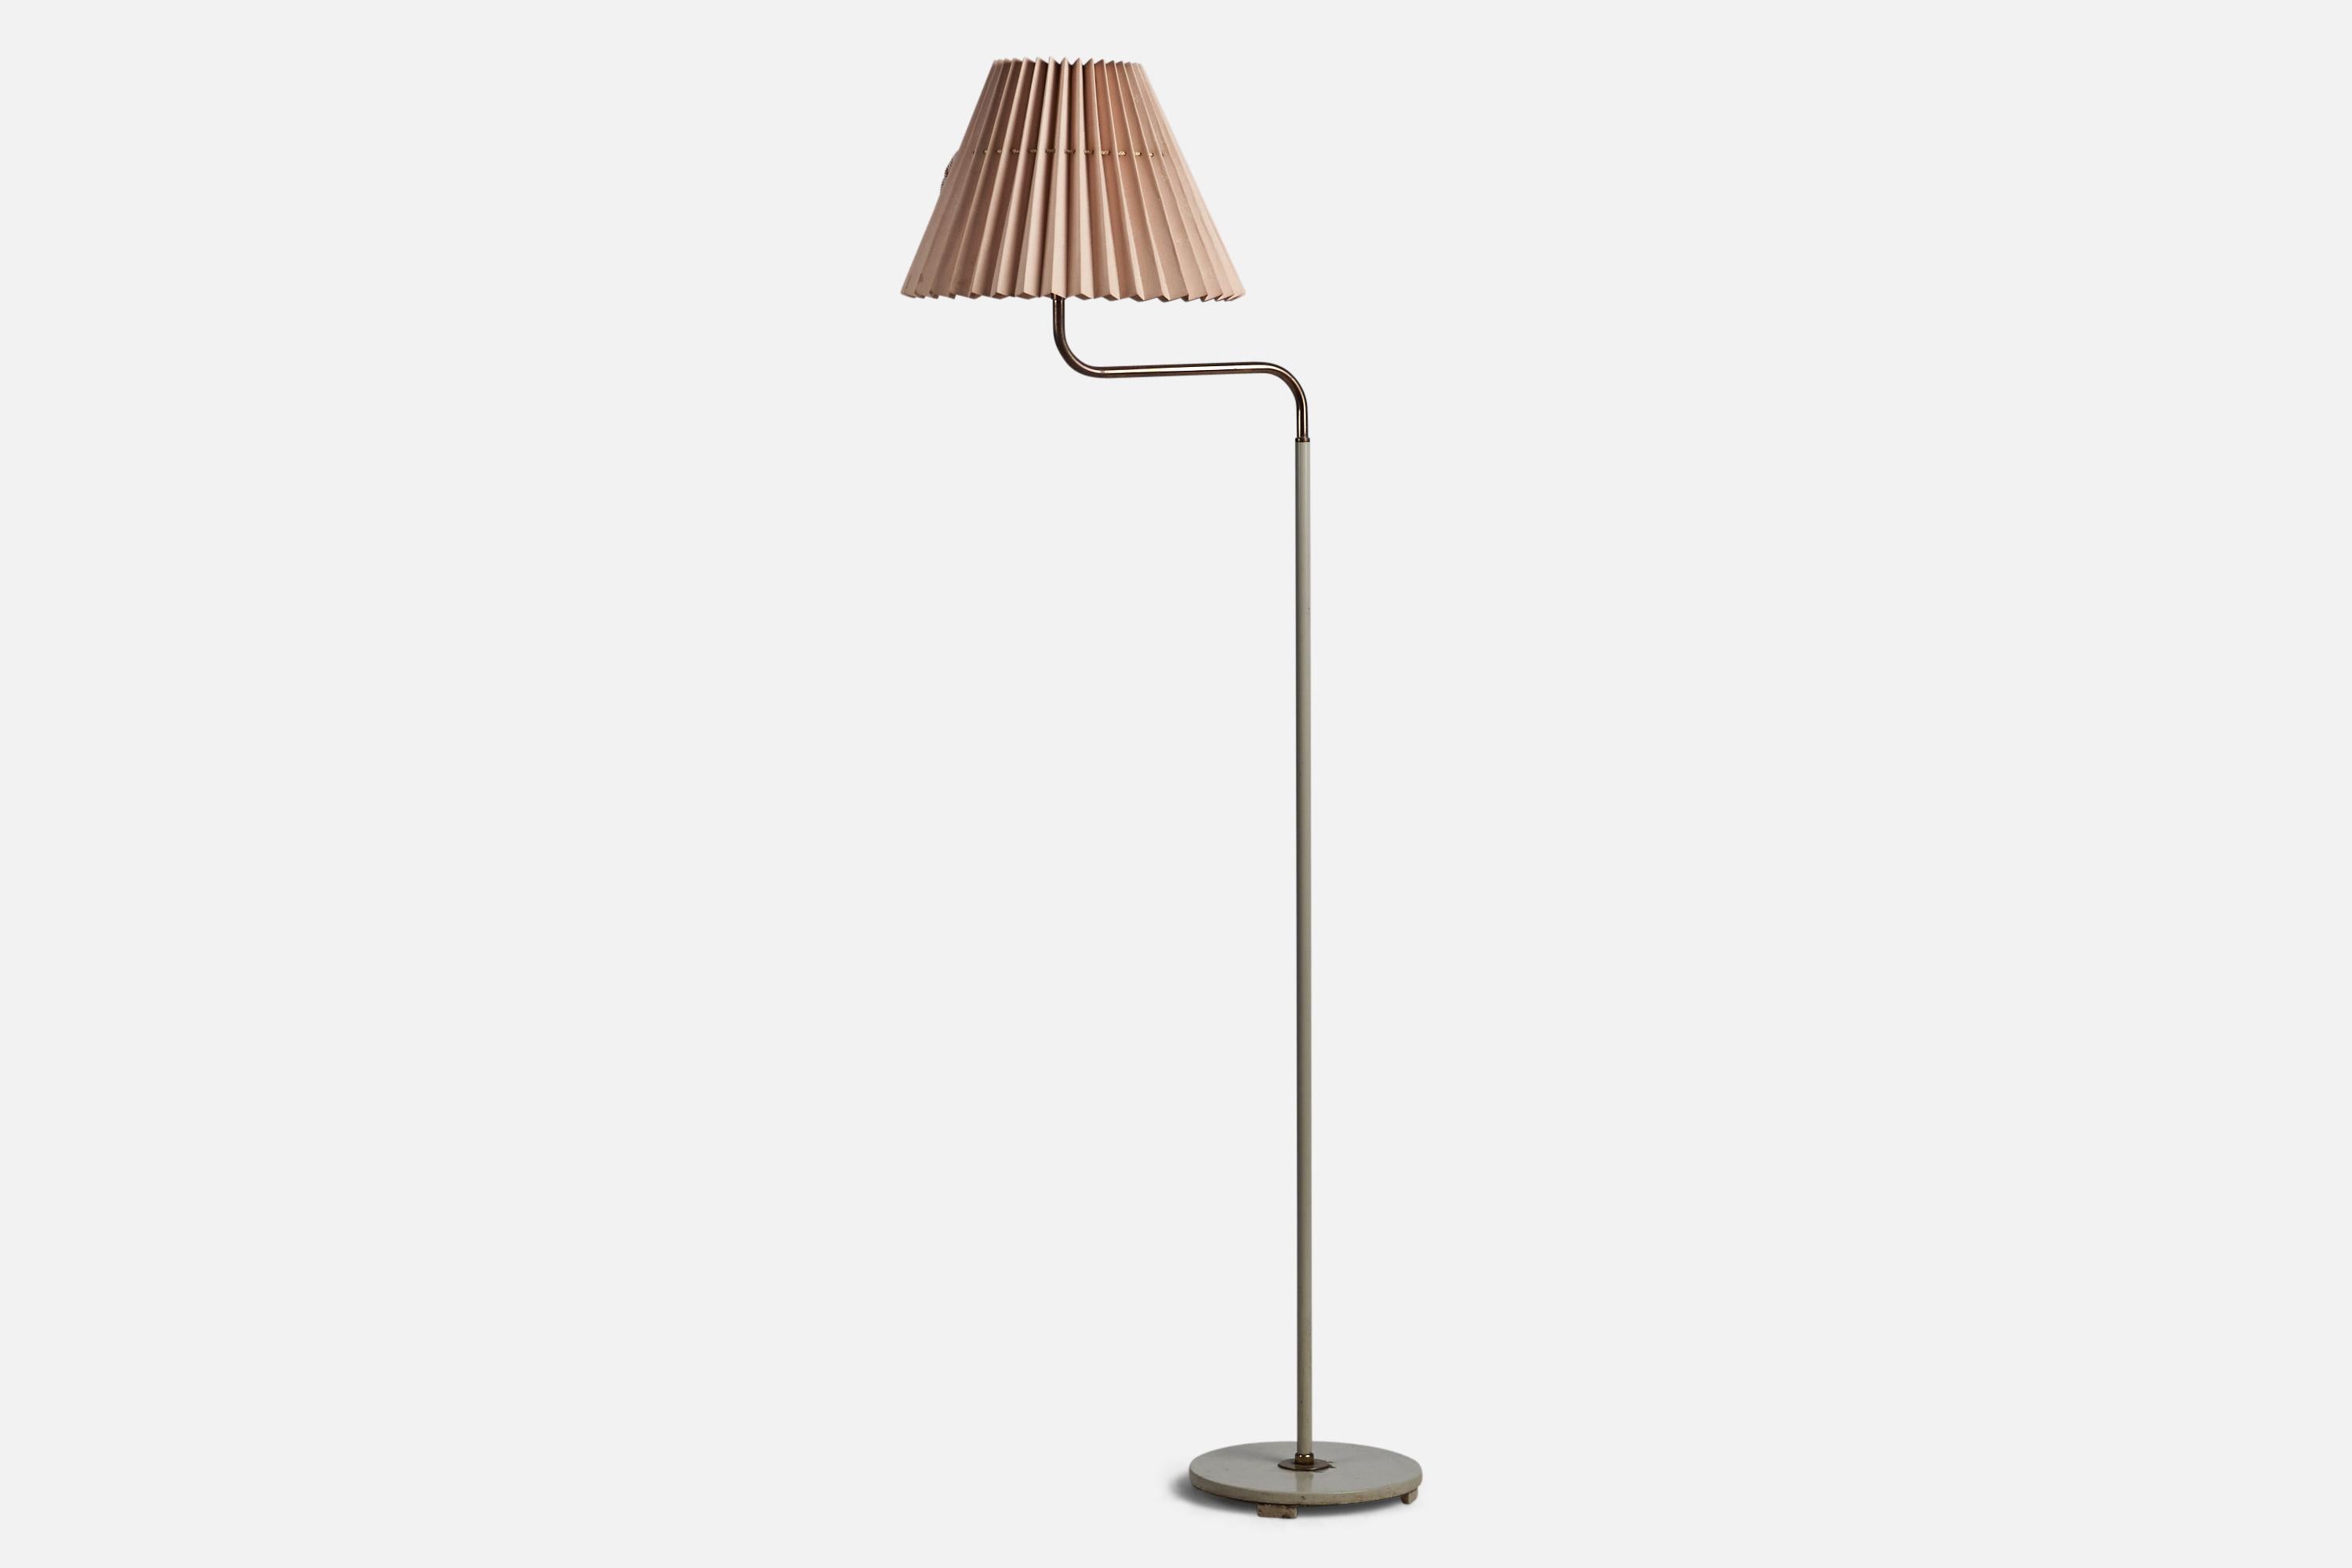 A brass, light grey-lacquered metal and pink paper floor lamp designed and produced by ASEA, Sweden, 1940s.

Overall Dimensions (inches): 59” H x 13.75” W x 22” D
Bulb Specifications: E-26 Bulb
Number of Sockets: 1
All lighting will be converted for